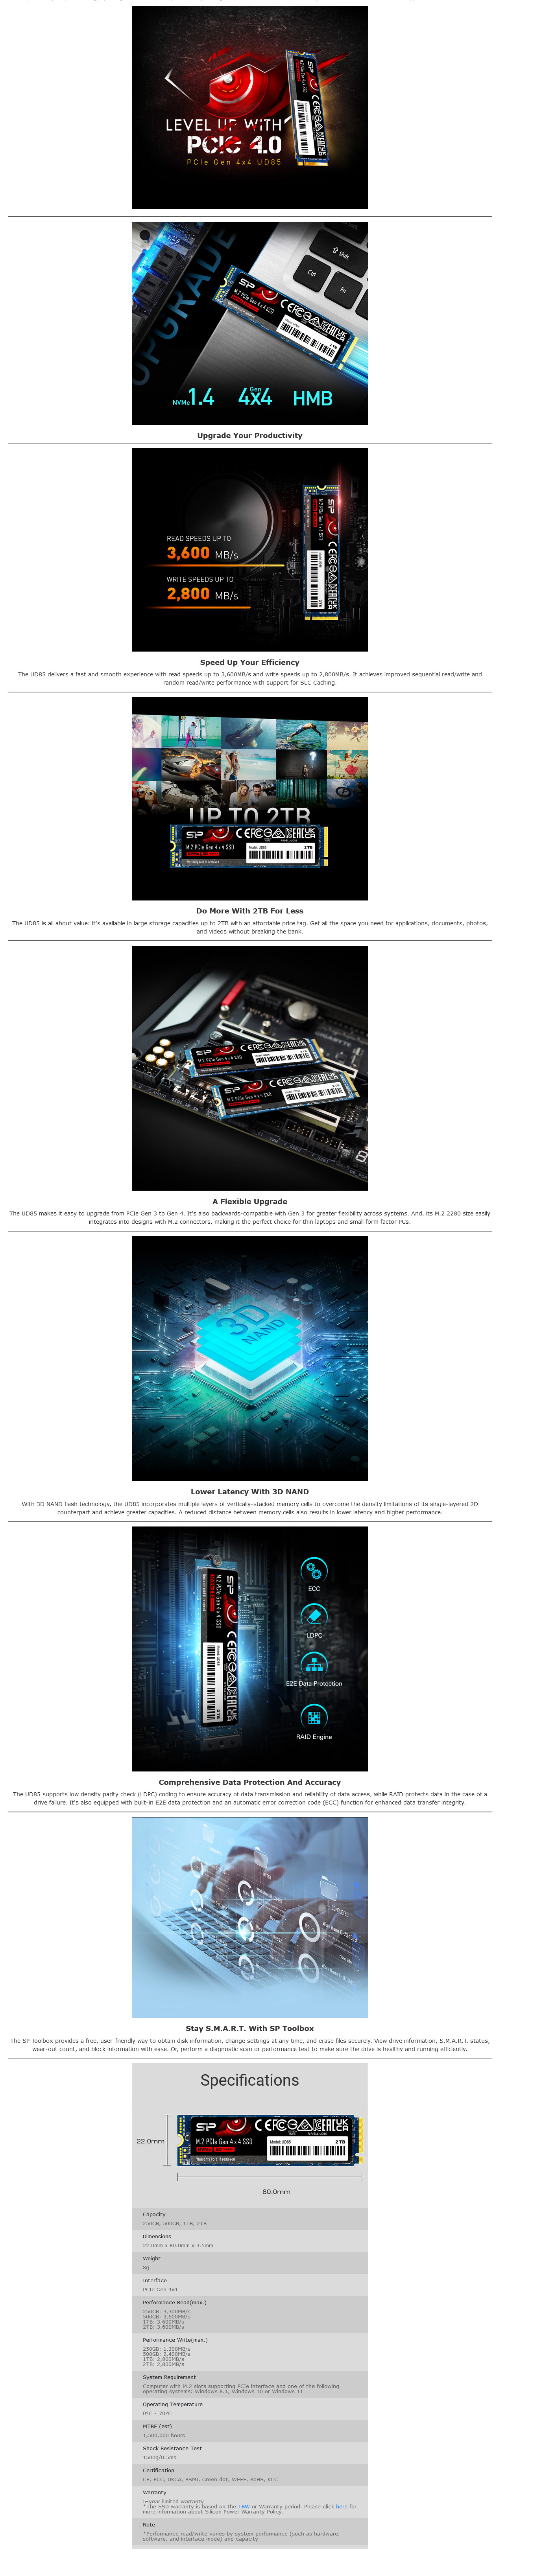 A large marketing image providing additional information about the product Silicon Power UD85 PCIe 4.0 NVMe M.2 SSD - 2TB - Additional alt info not provided